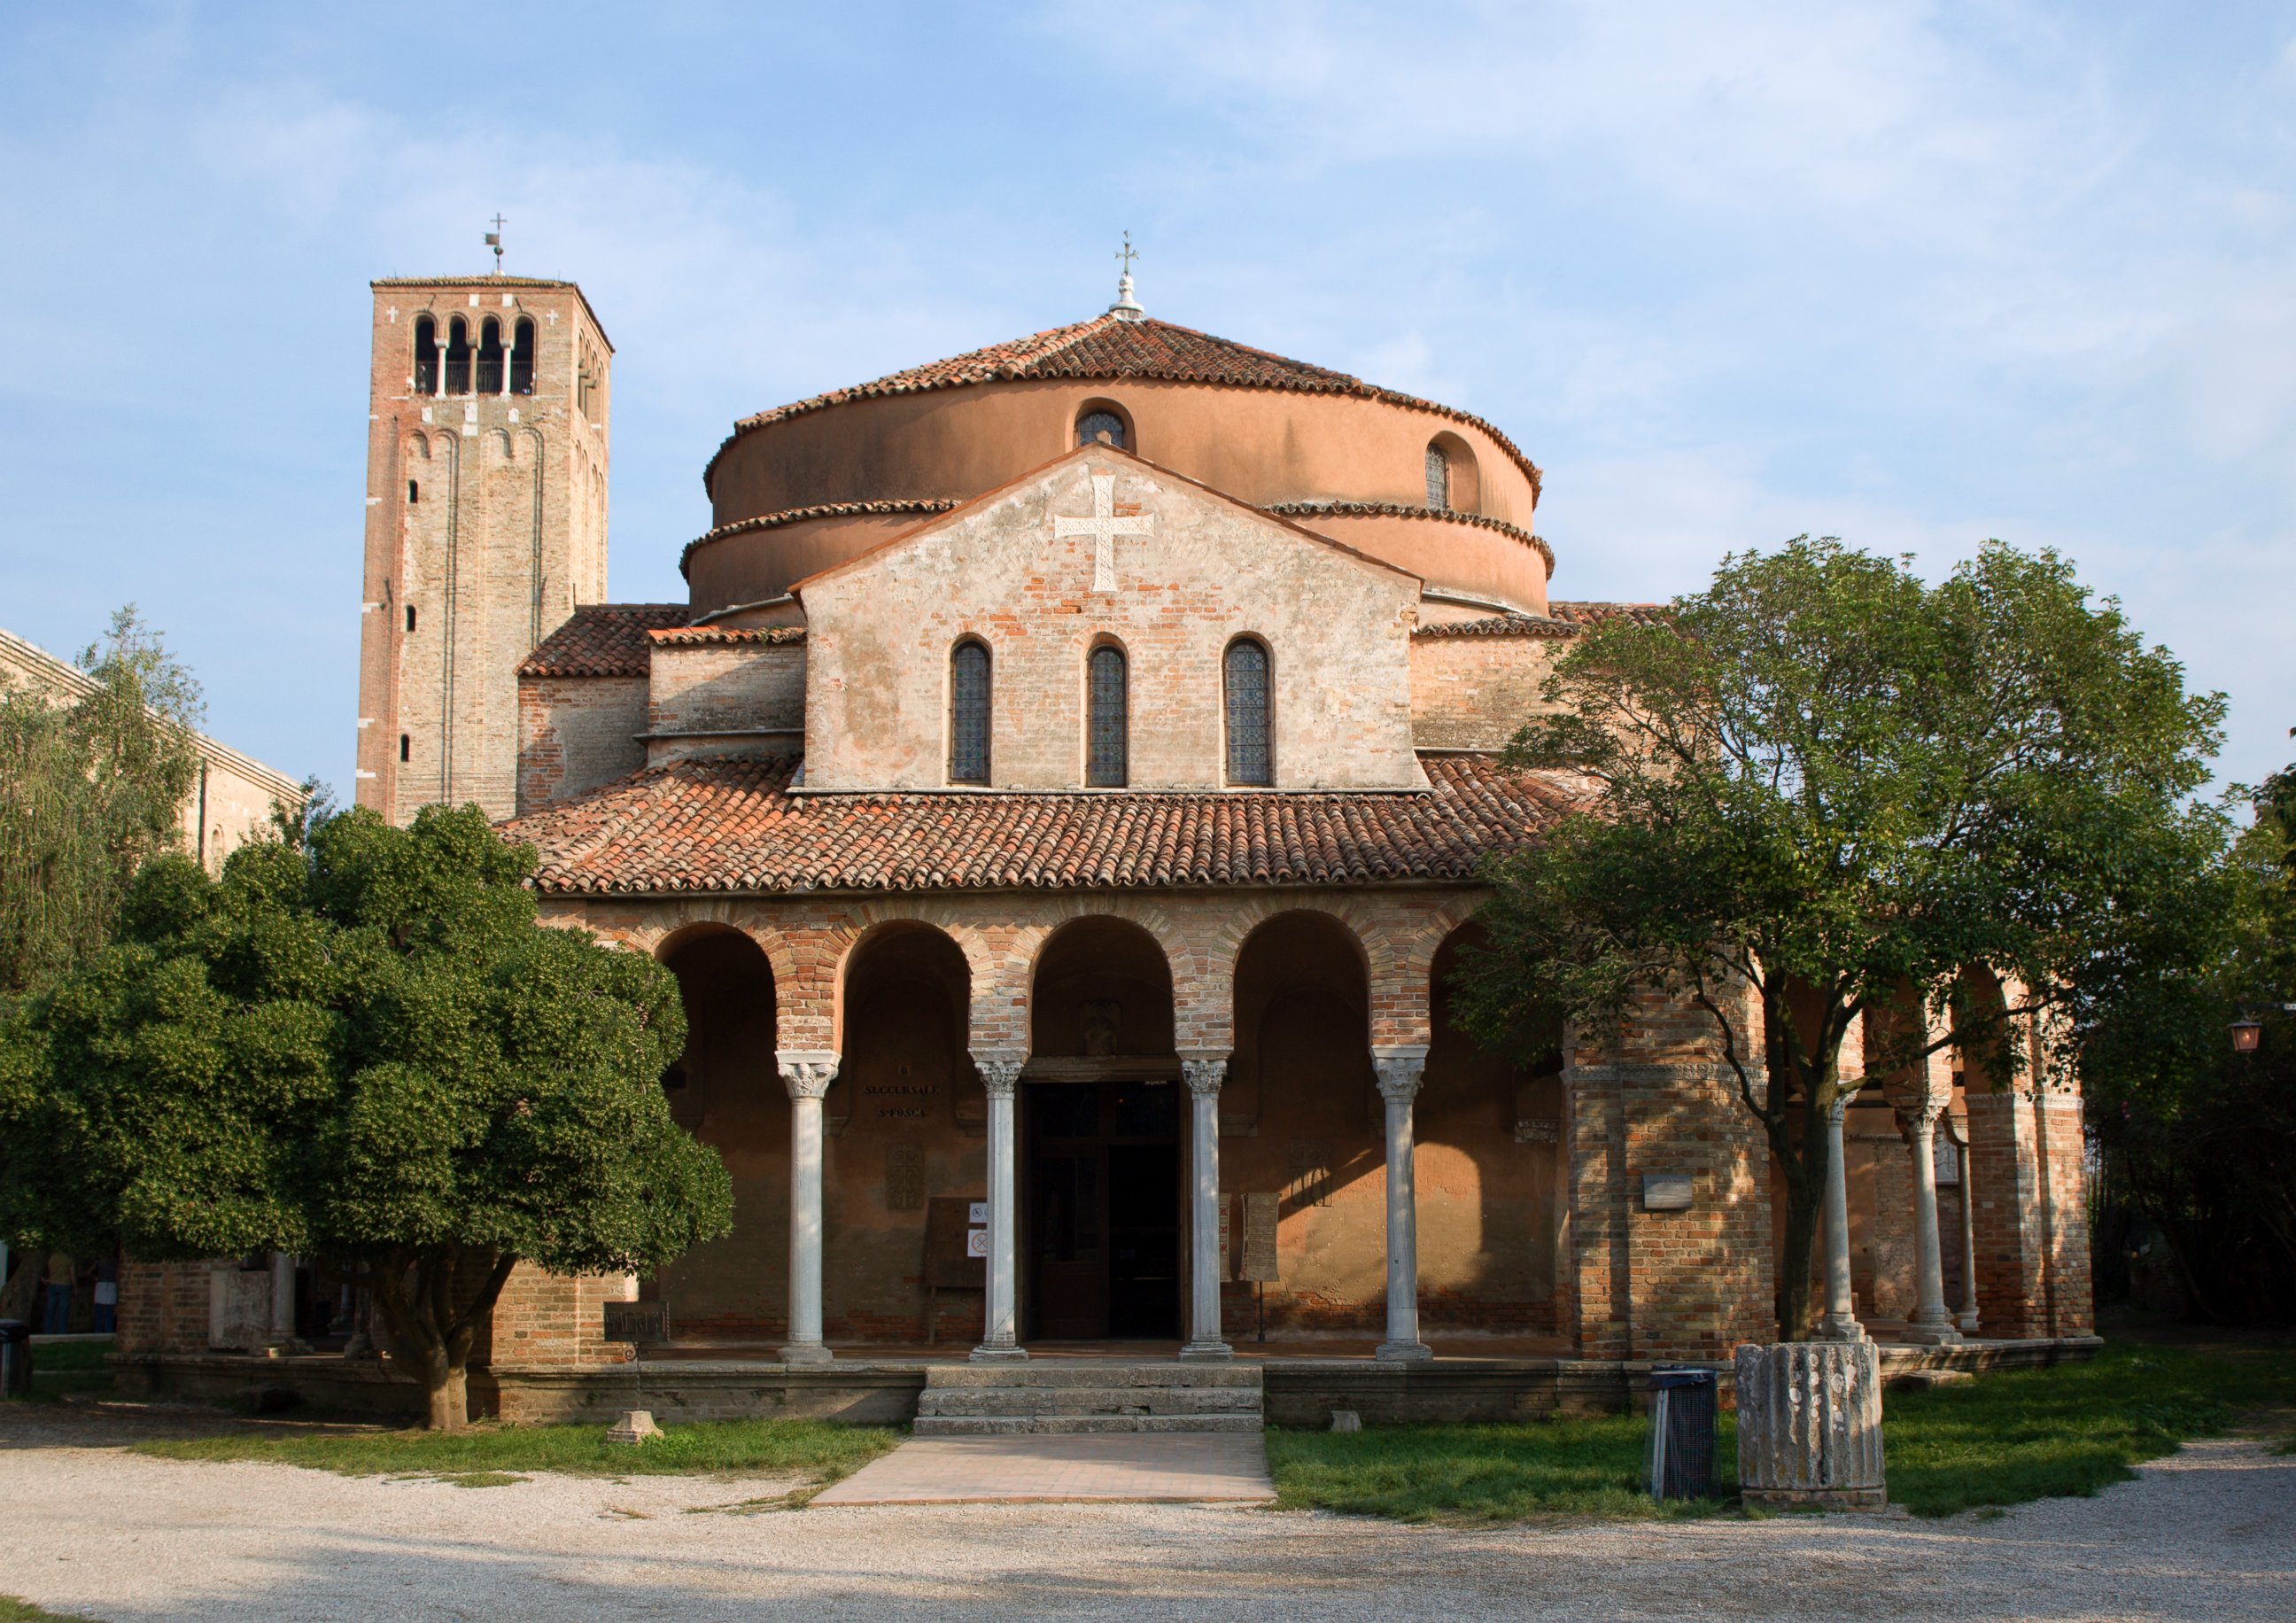 PHOTO: The Church of Santa Fosca on the deserted lagoon island of Torcello, Italy is pictured in this undated file photo. 